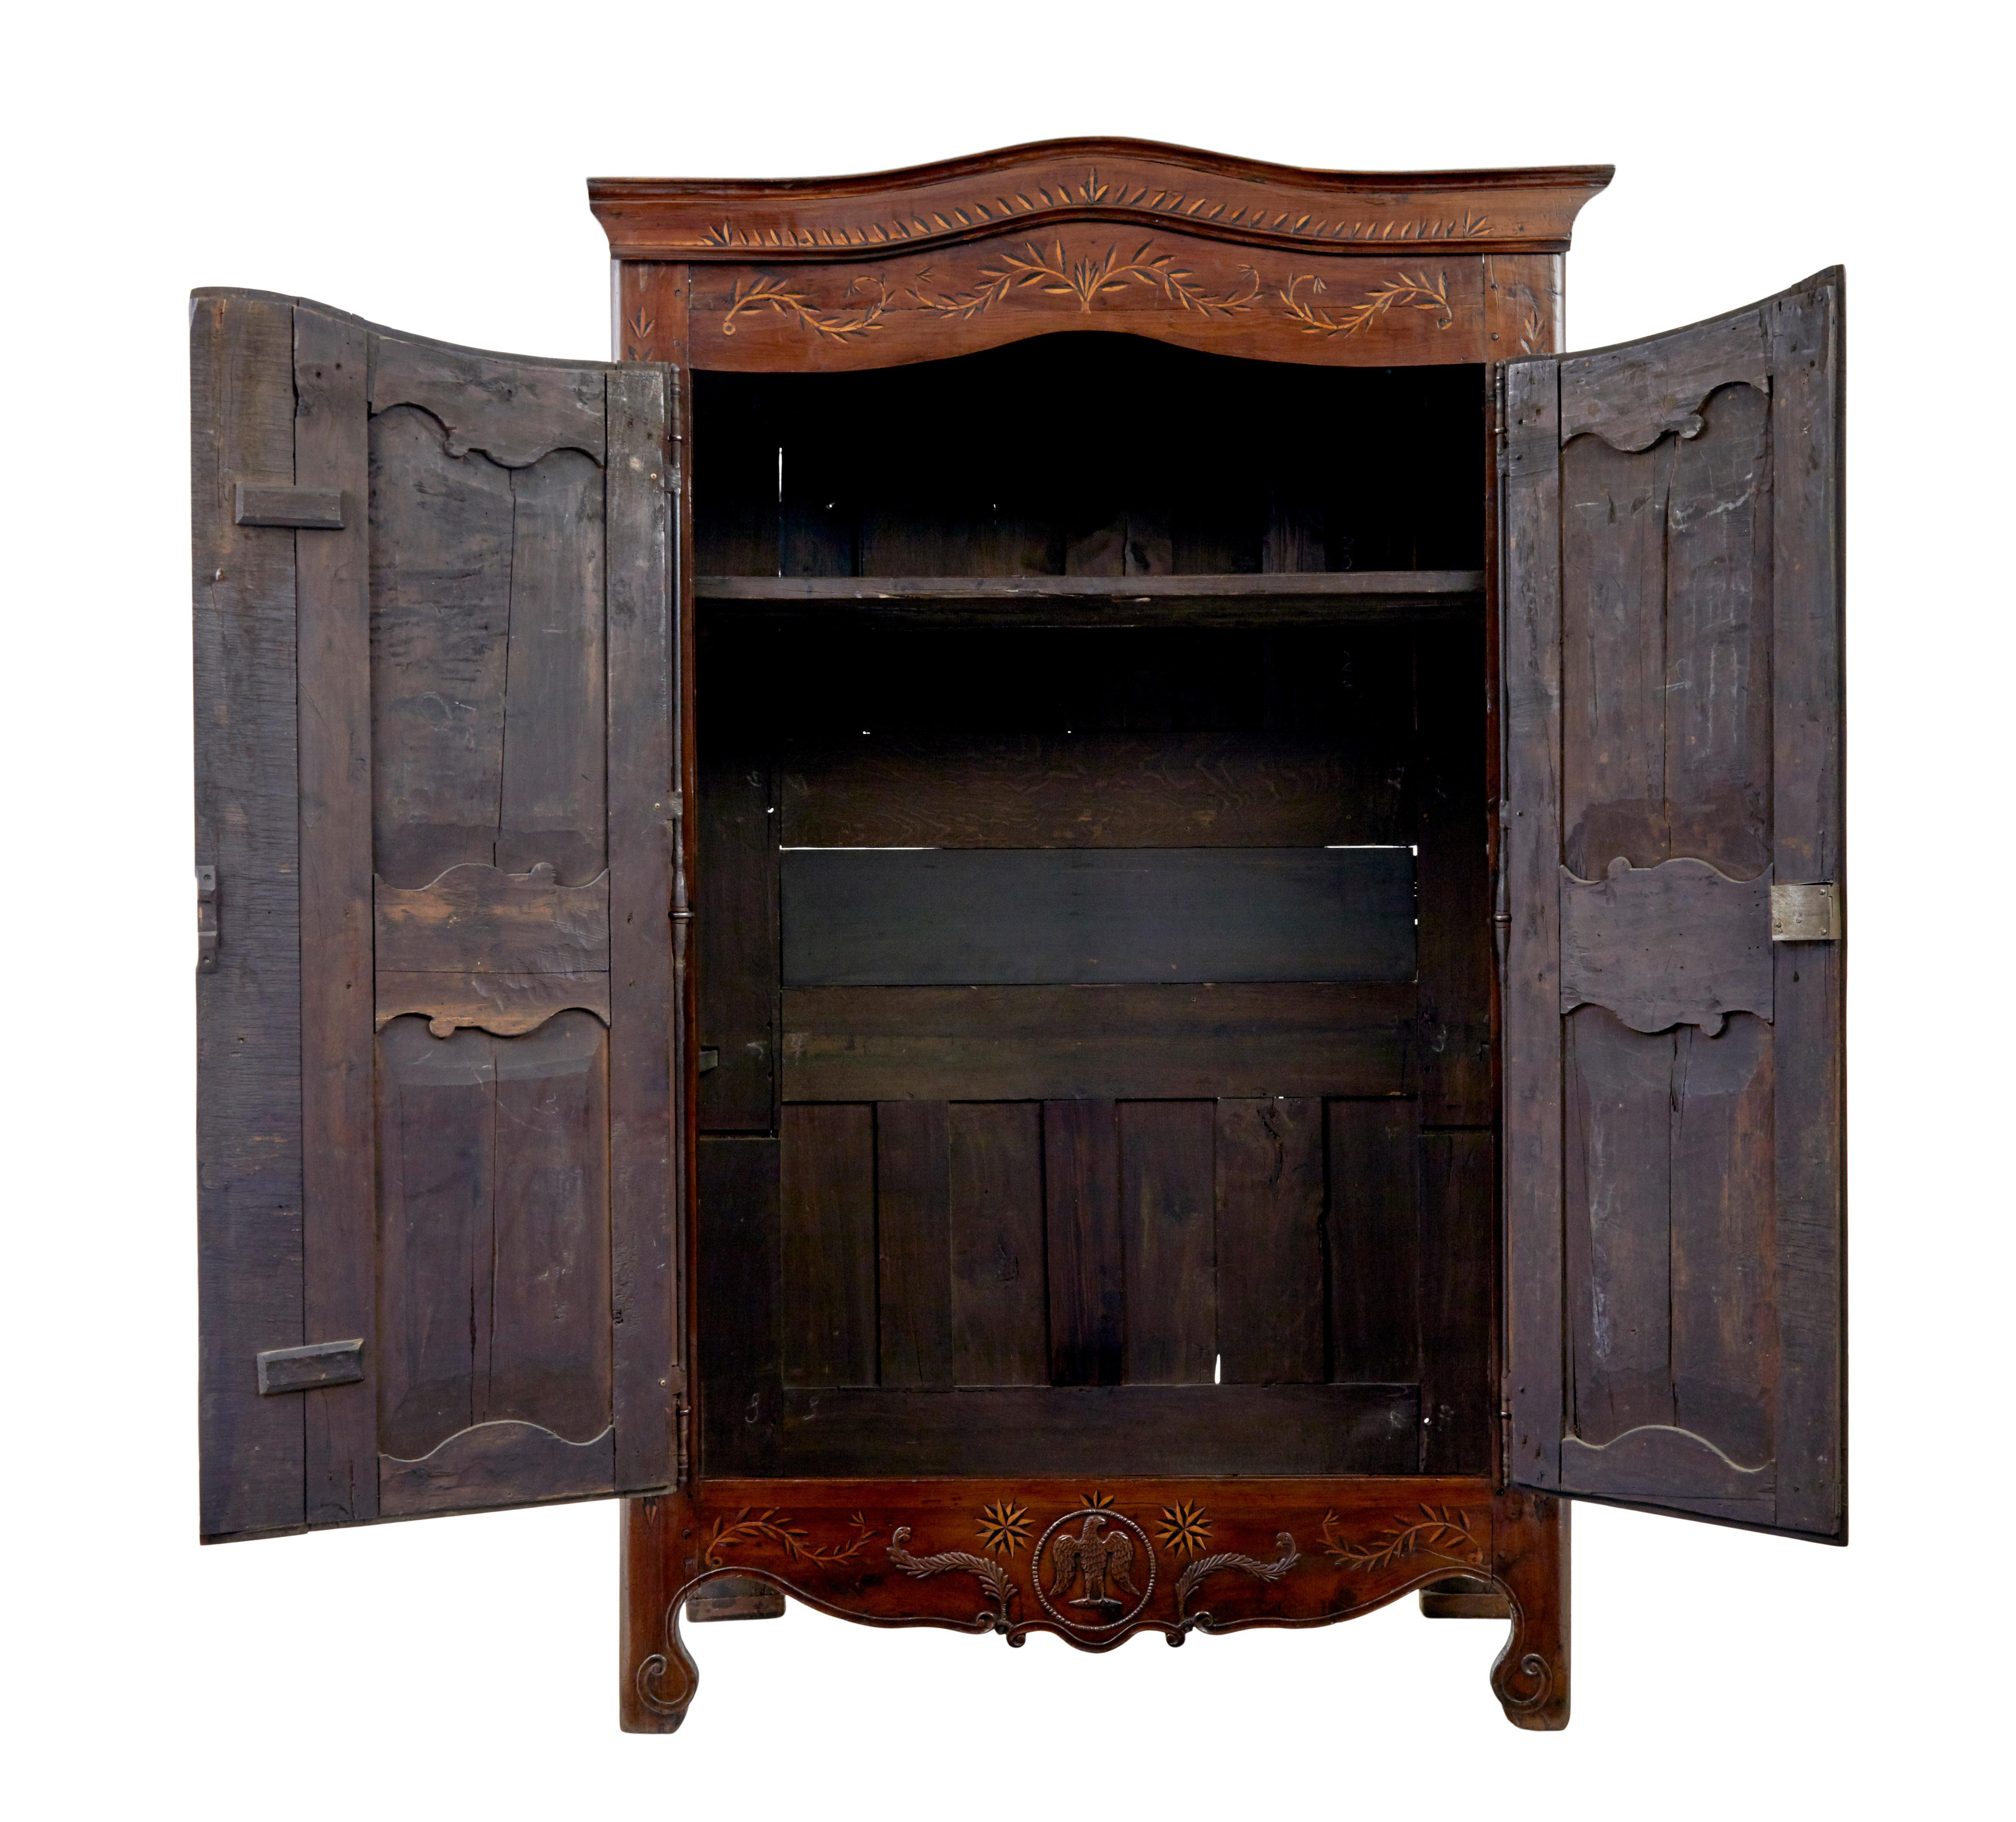 18th century carved french yew wood and chestnut armoire circa 1780.

This sort of armoire is also known as a marriage armoire.

Cornice and front are profusely inlaid with a leaf design, with a snake flowing up the middle of the doors, with pierced